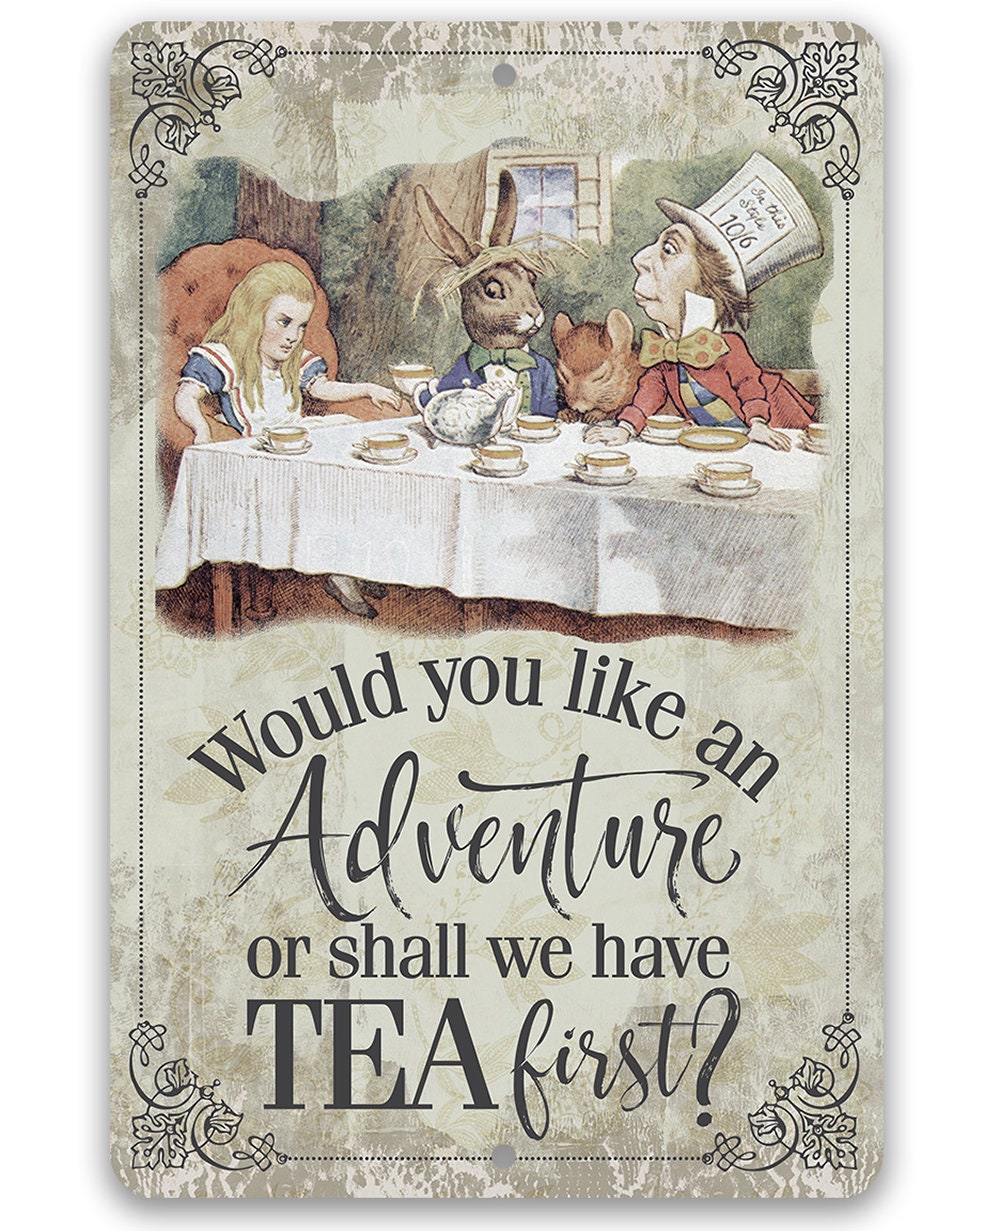 Would You Like An Adventure Or Shall We Have Tea First - Metal Sign Metal Sign Lone Star Art 